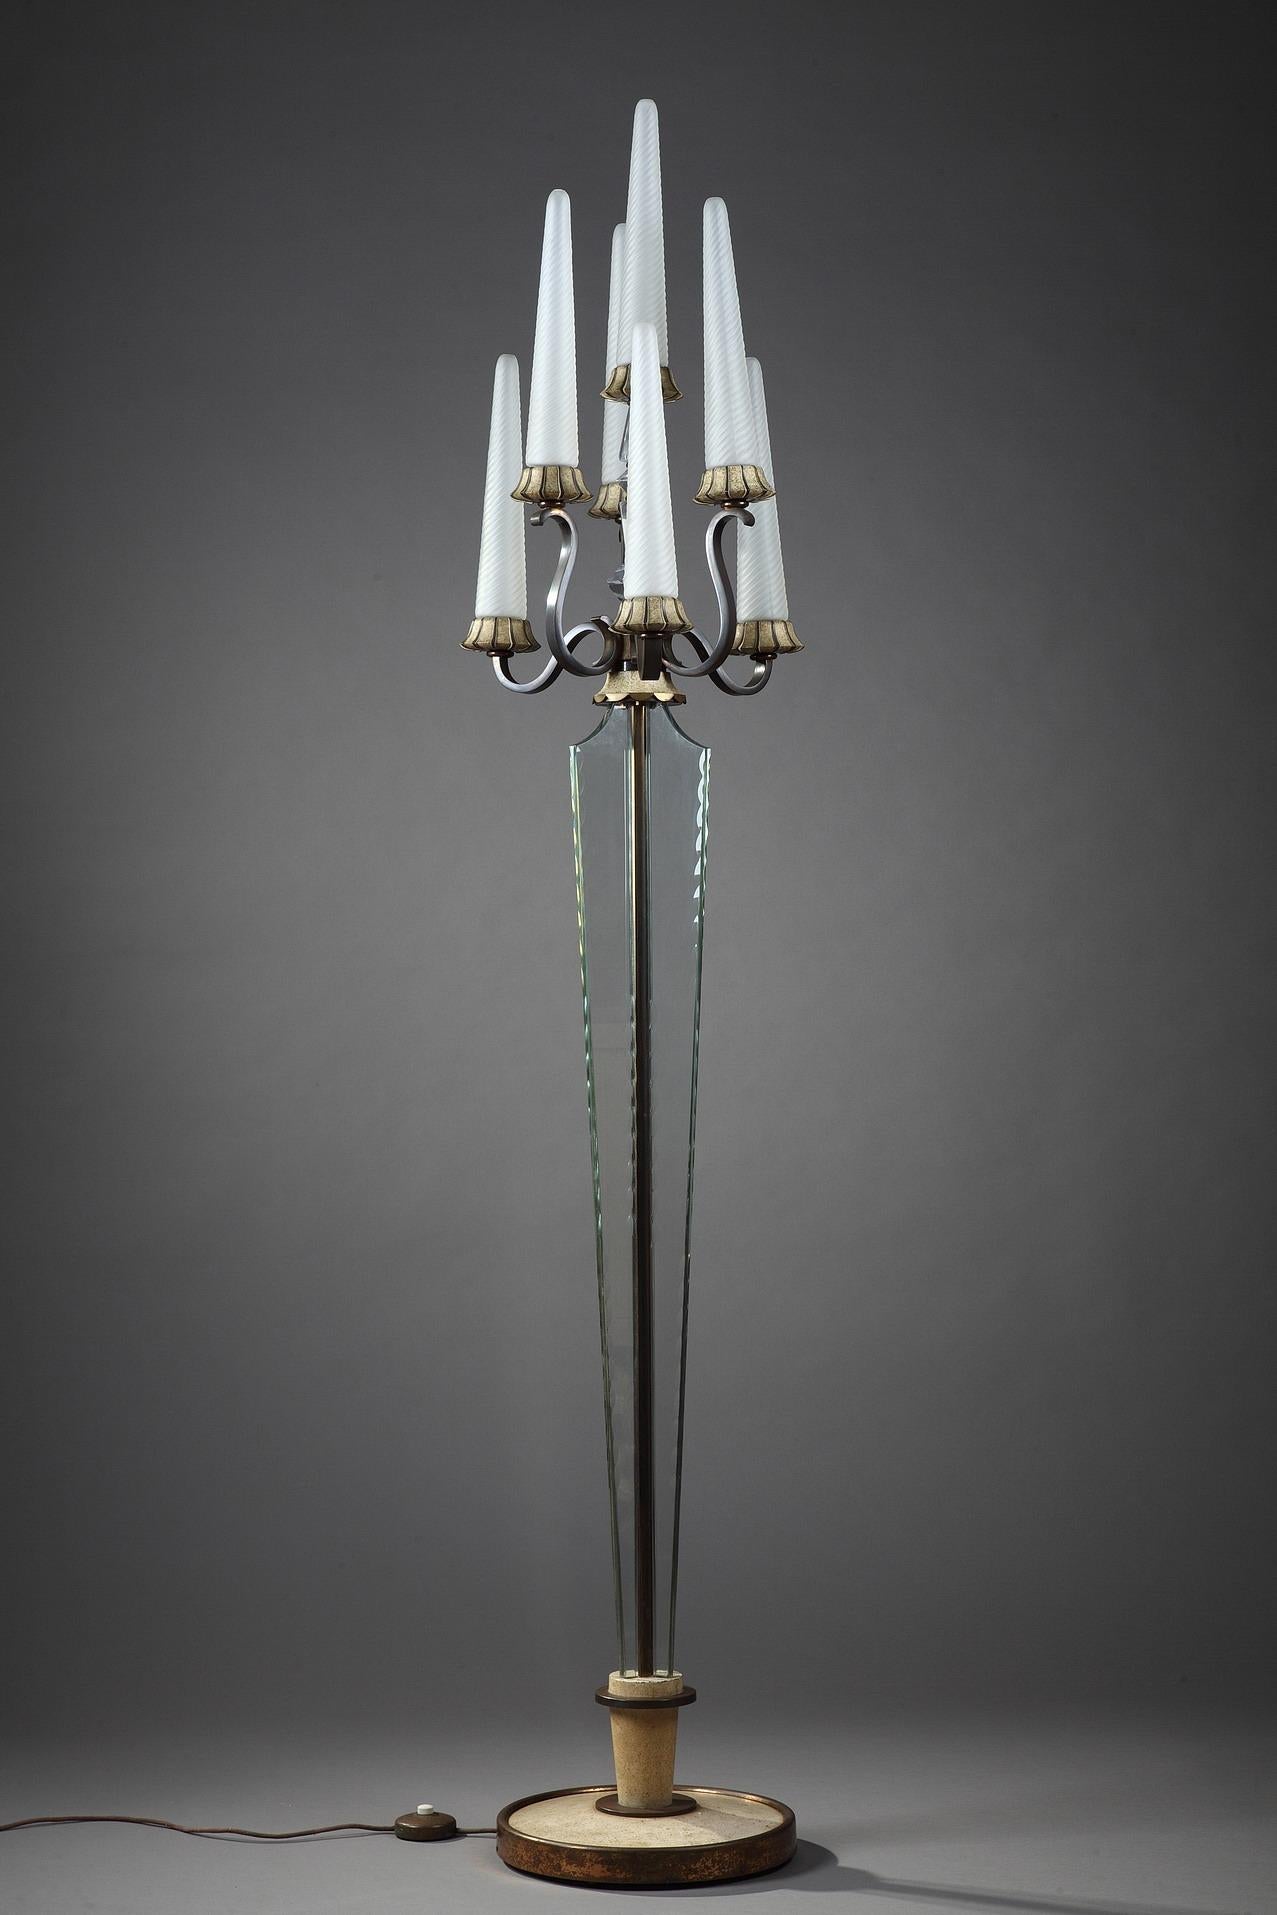 Exquisite lacquered bronze lampstand with seven twisted glass lights, resting on a high stem in Sevres crystal. Marked crystal GARANTI SEVRES FRANCE. Very good vintage condition,
circa 1940
Dimensions: W 15.7 in - D 15.7 in - H 76.8